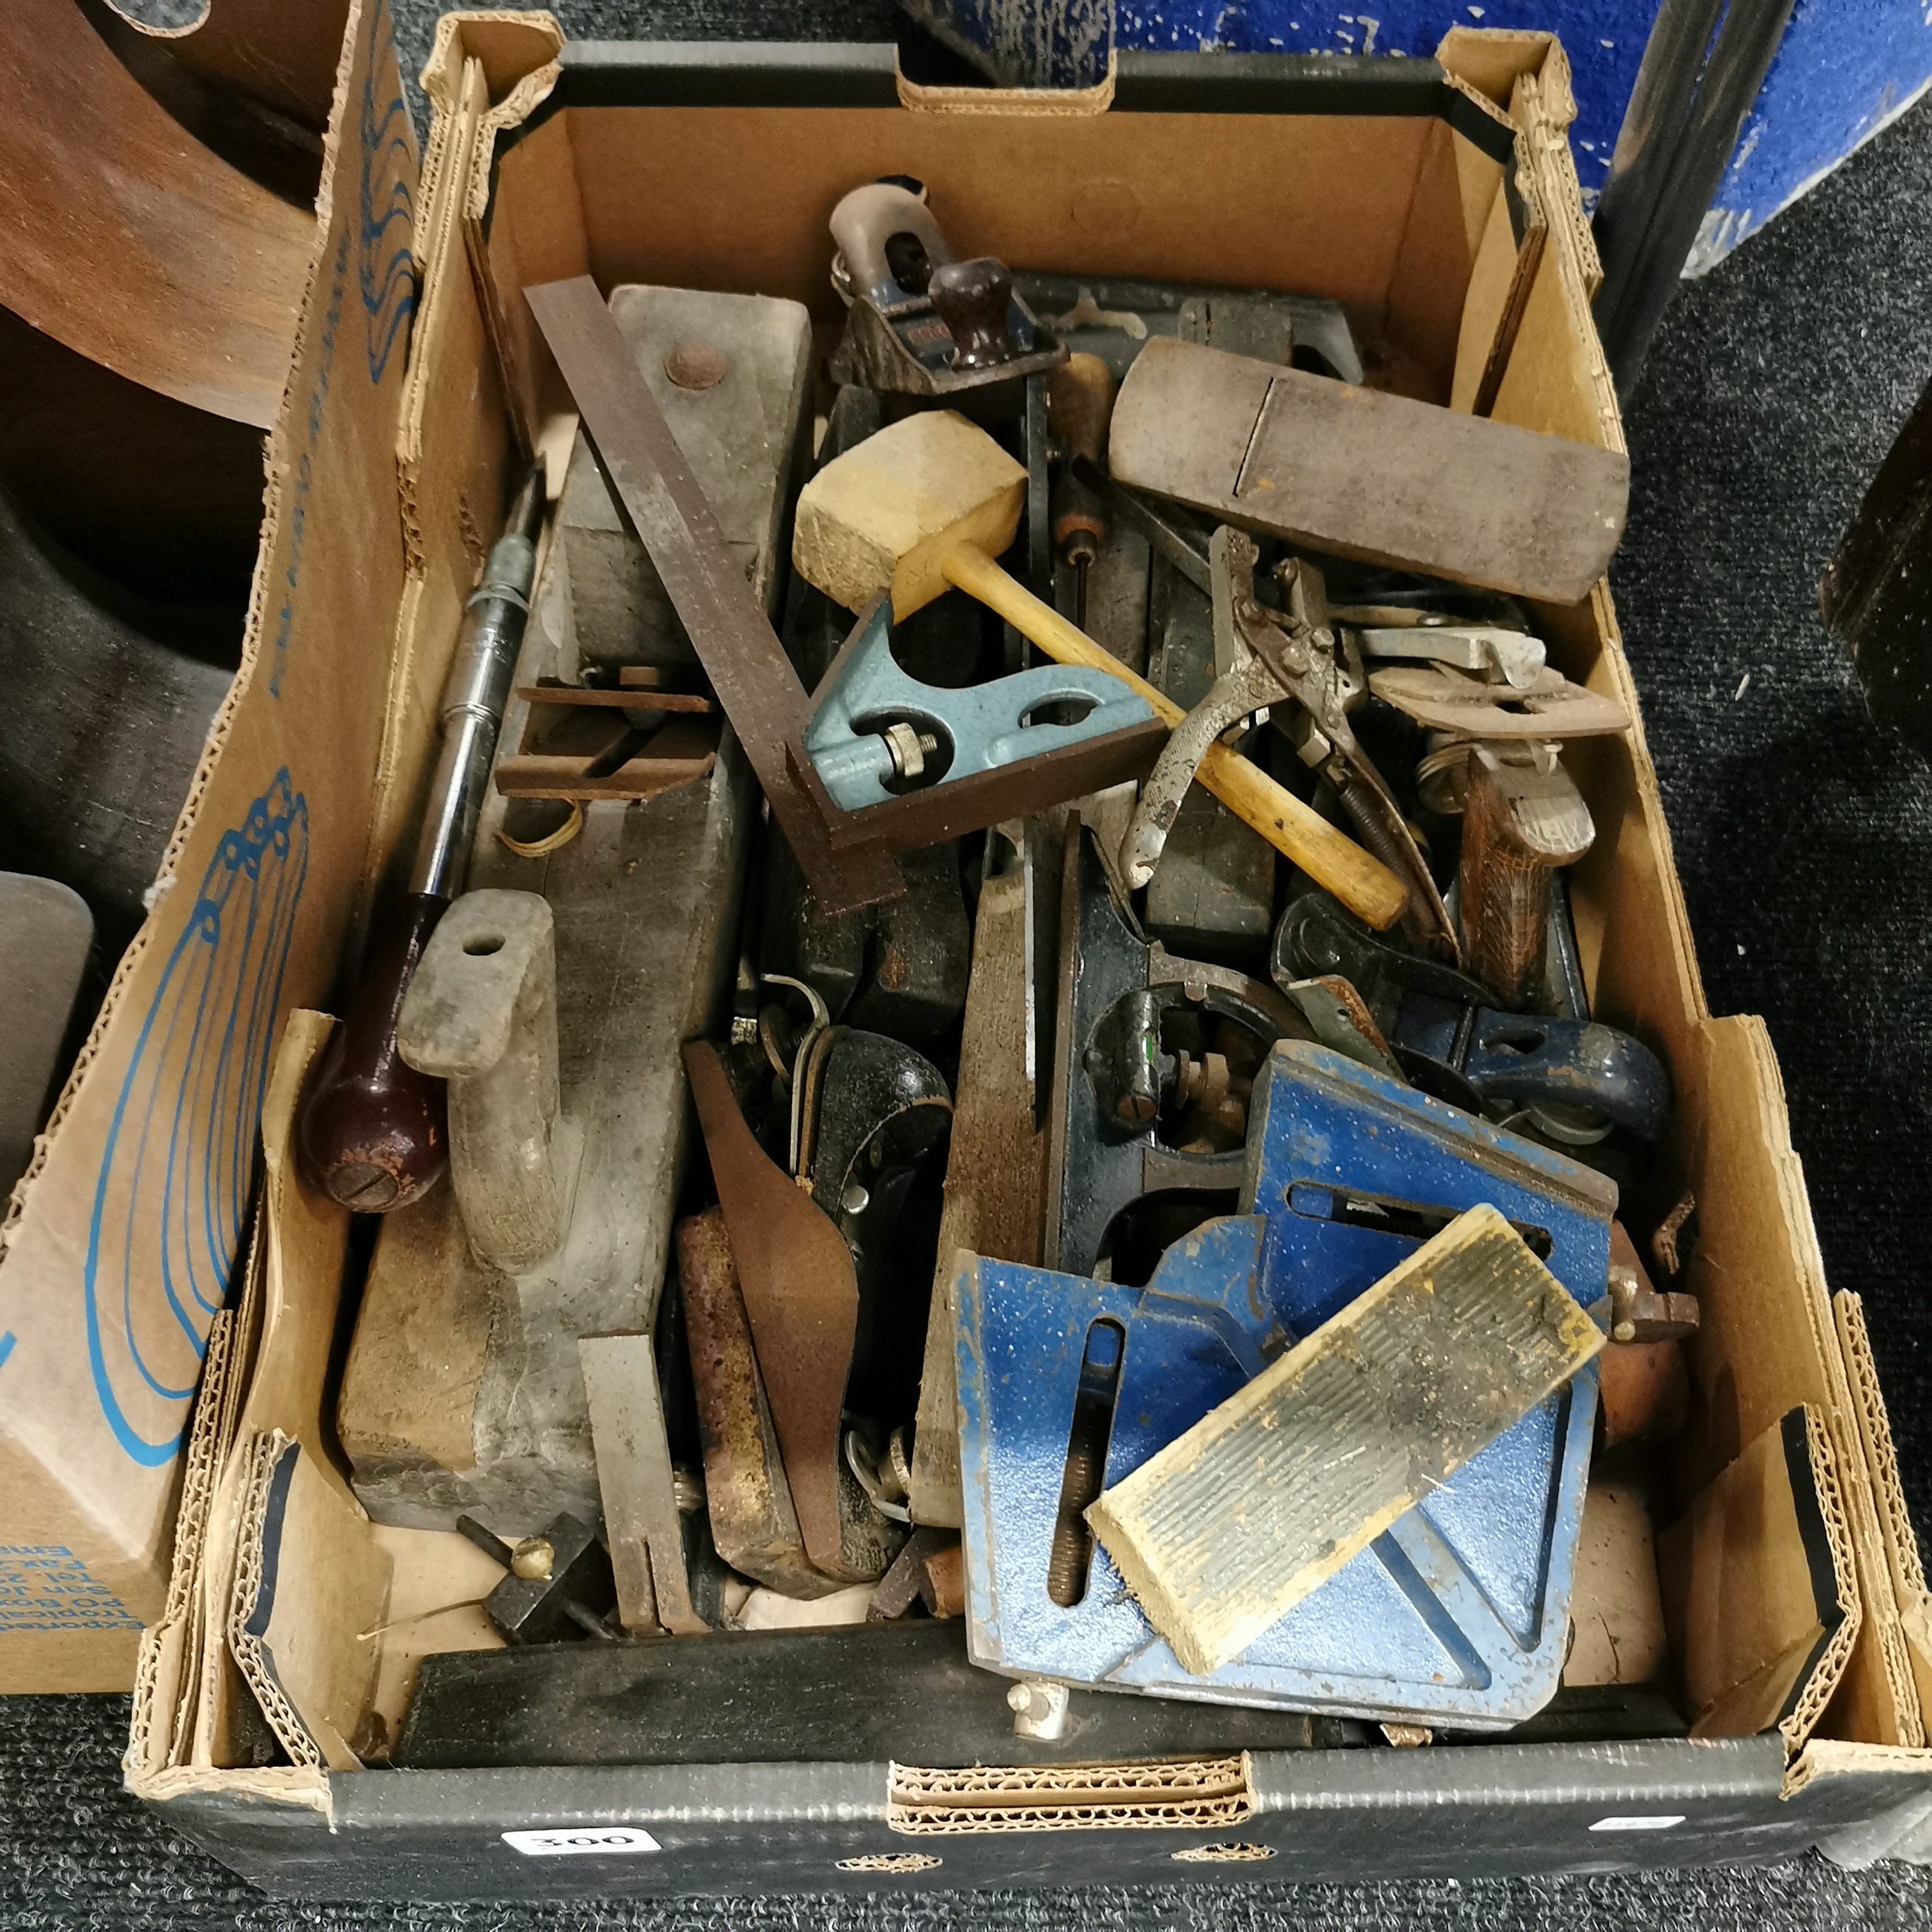 BOX OF WOODWORKING TOOLS